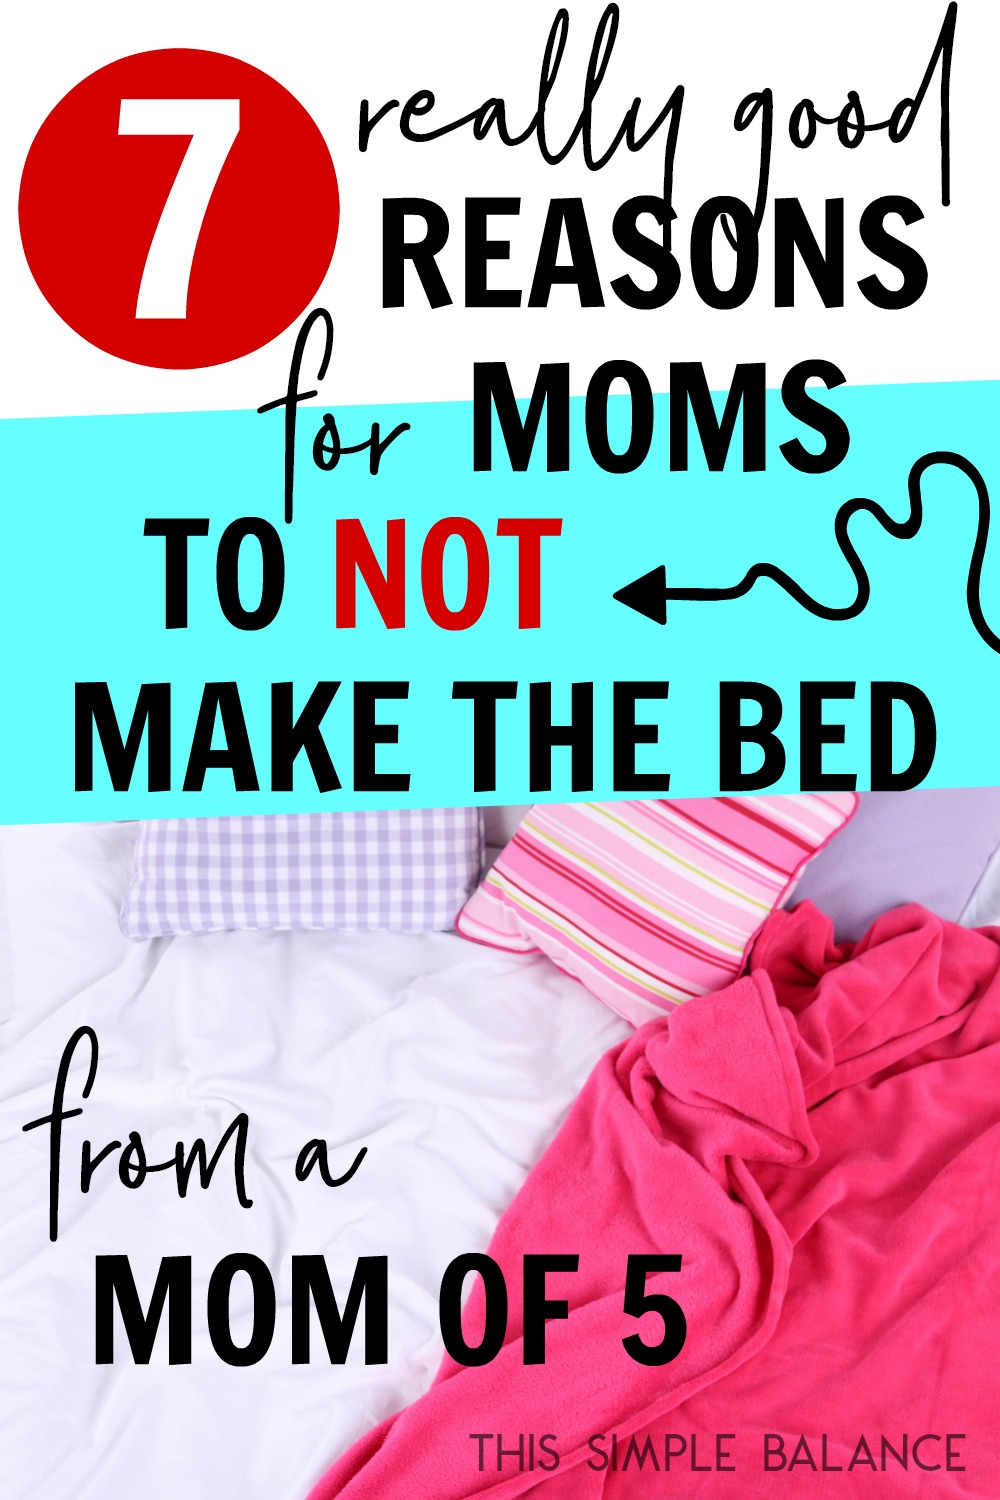 comfortable bed with striped pillows and pink throw blanket with text overlay, "7 reasons for moms not to make the bed, from a mom of 5"